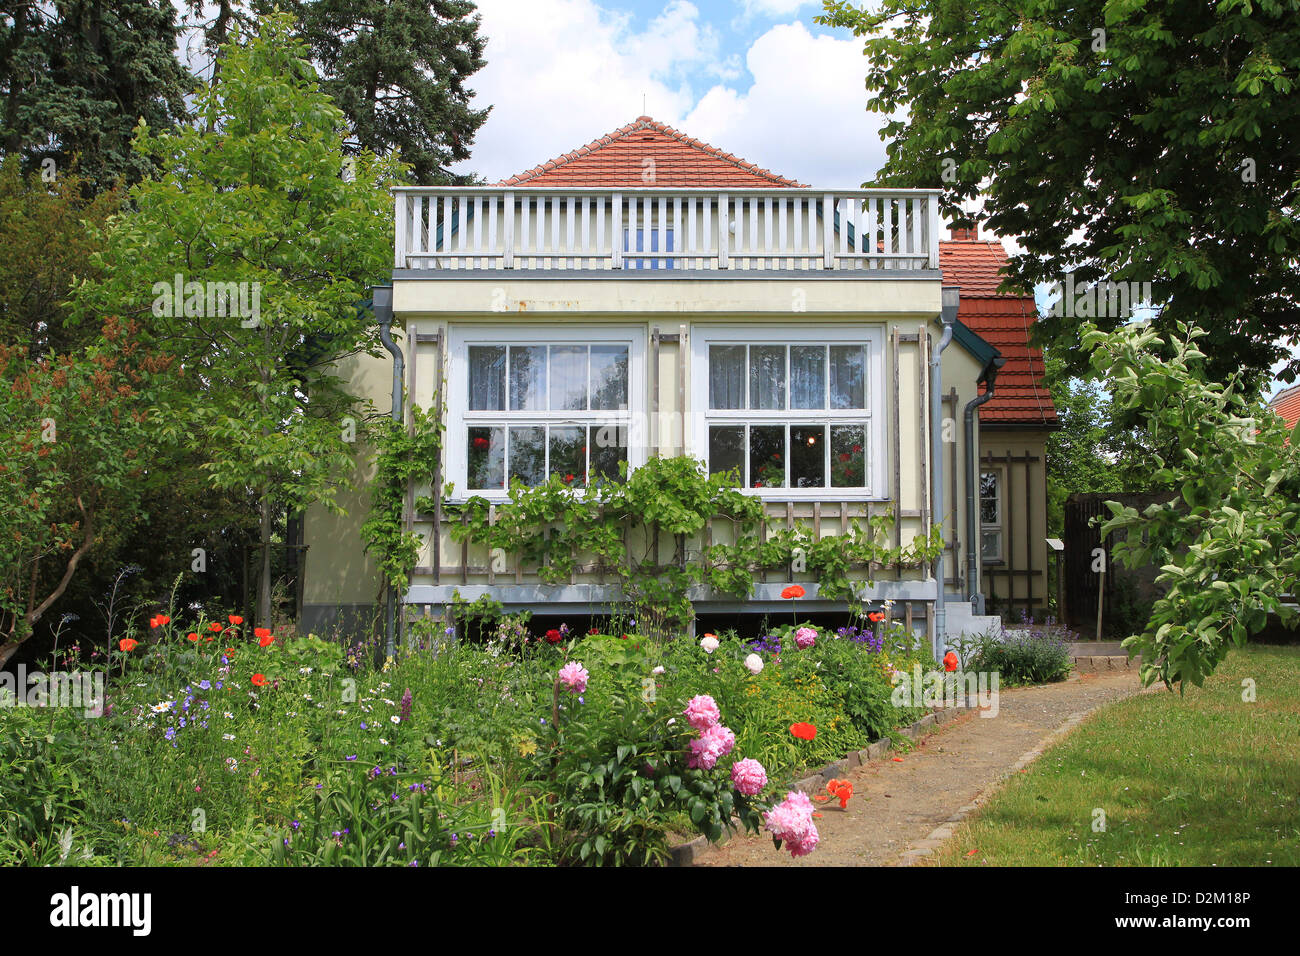 The Hans-Fallada-Museum in Carwitz, Germany. The building was from 1933 until 1944 the residence of the famous German writer. Stock Photo